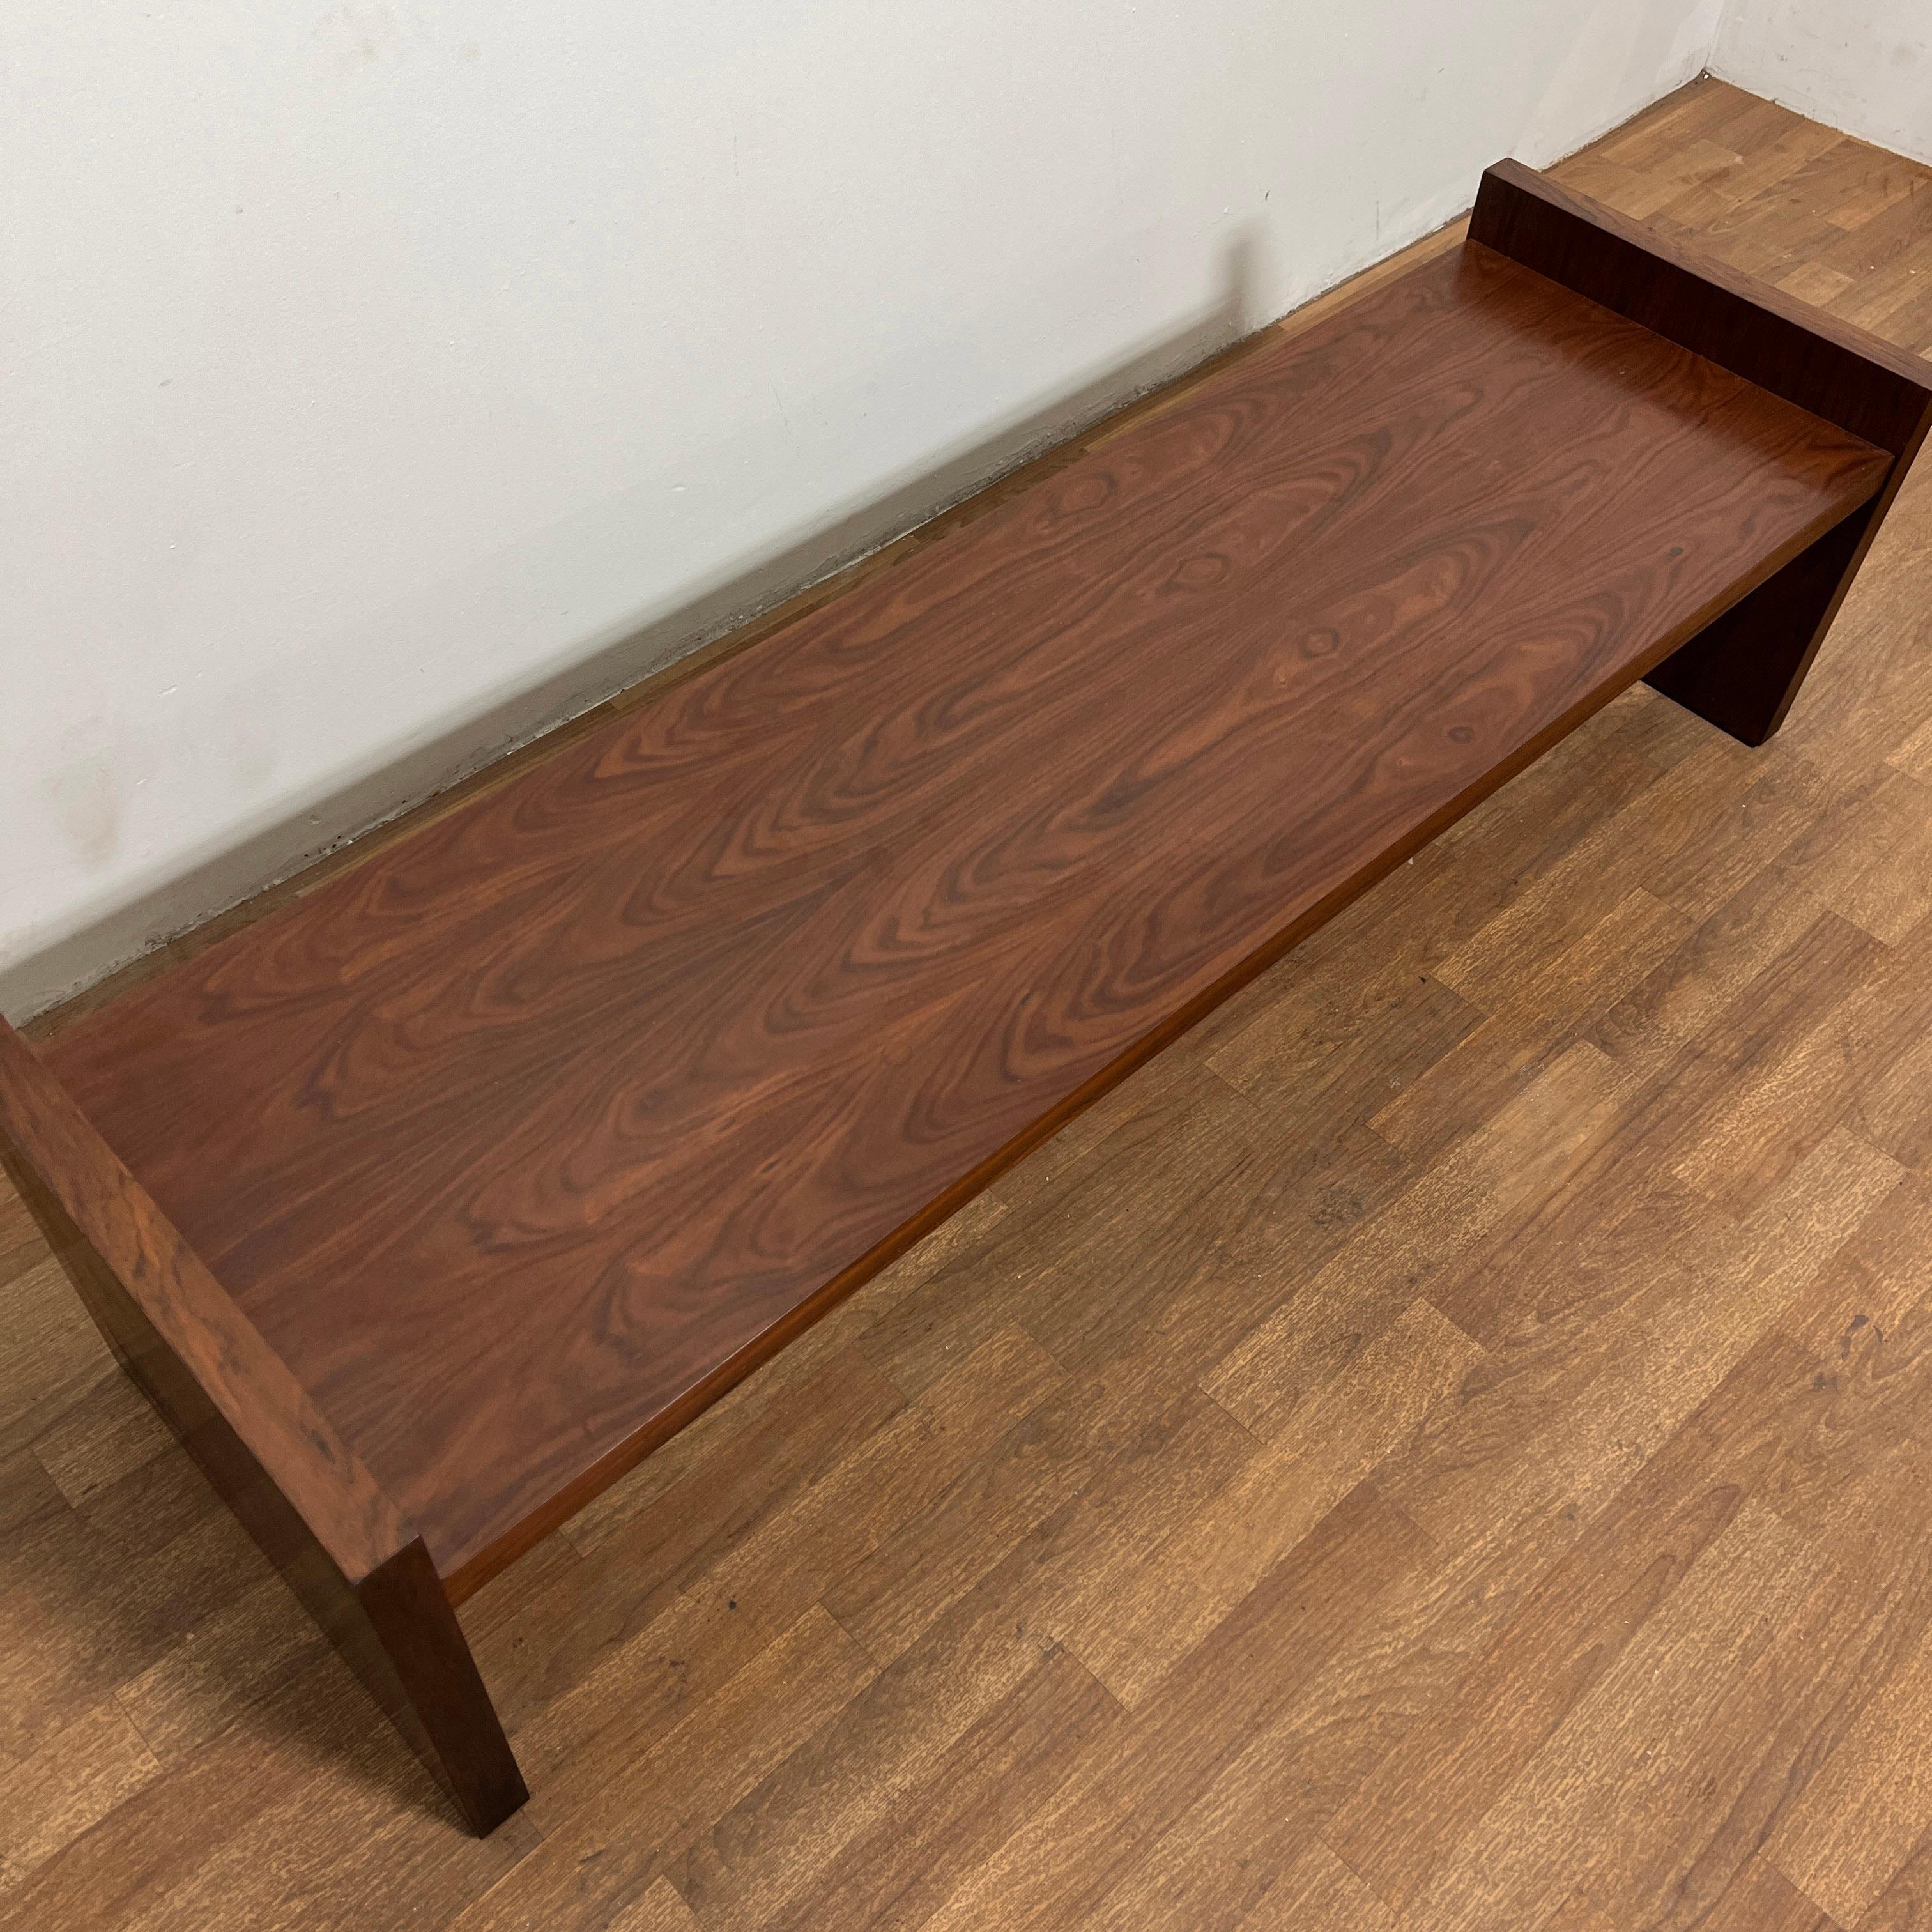 American Signed Dunbar Furniture Rosewood Bench Attributed to Edward Wormley, Ca. 1960s For Sale